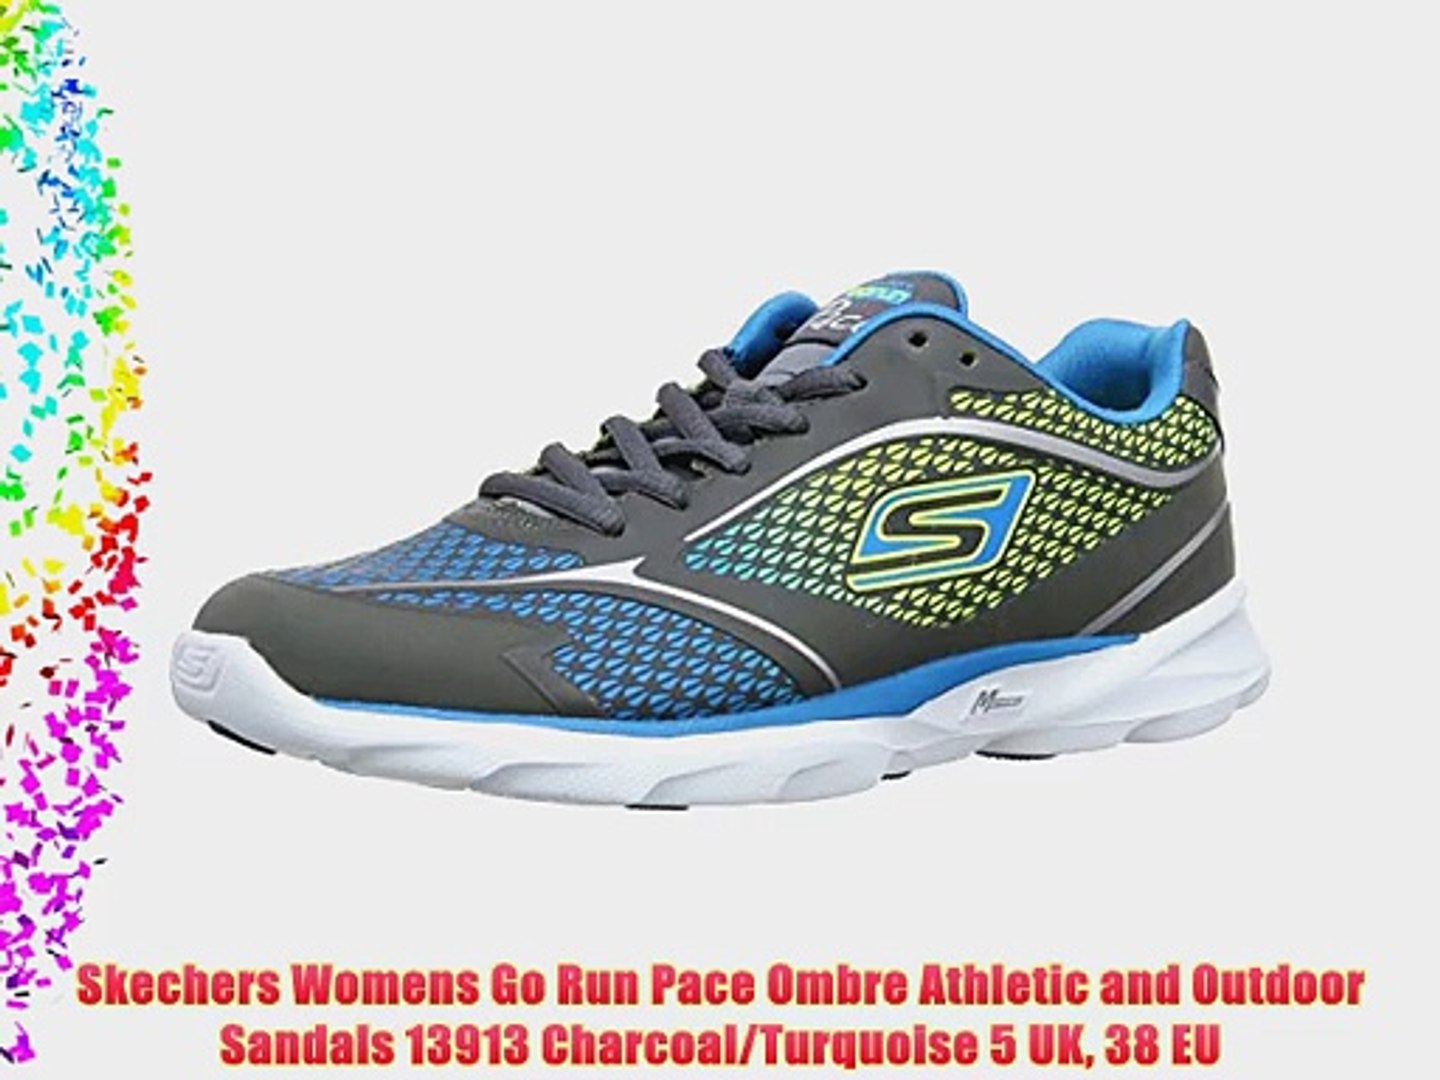 skechers go run pace ombre review